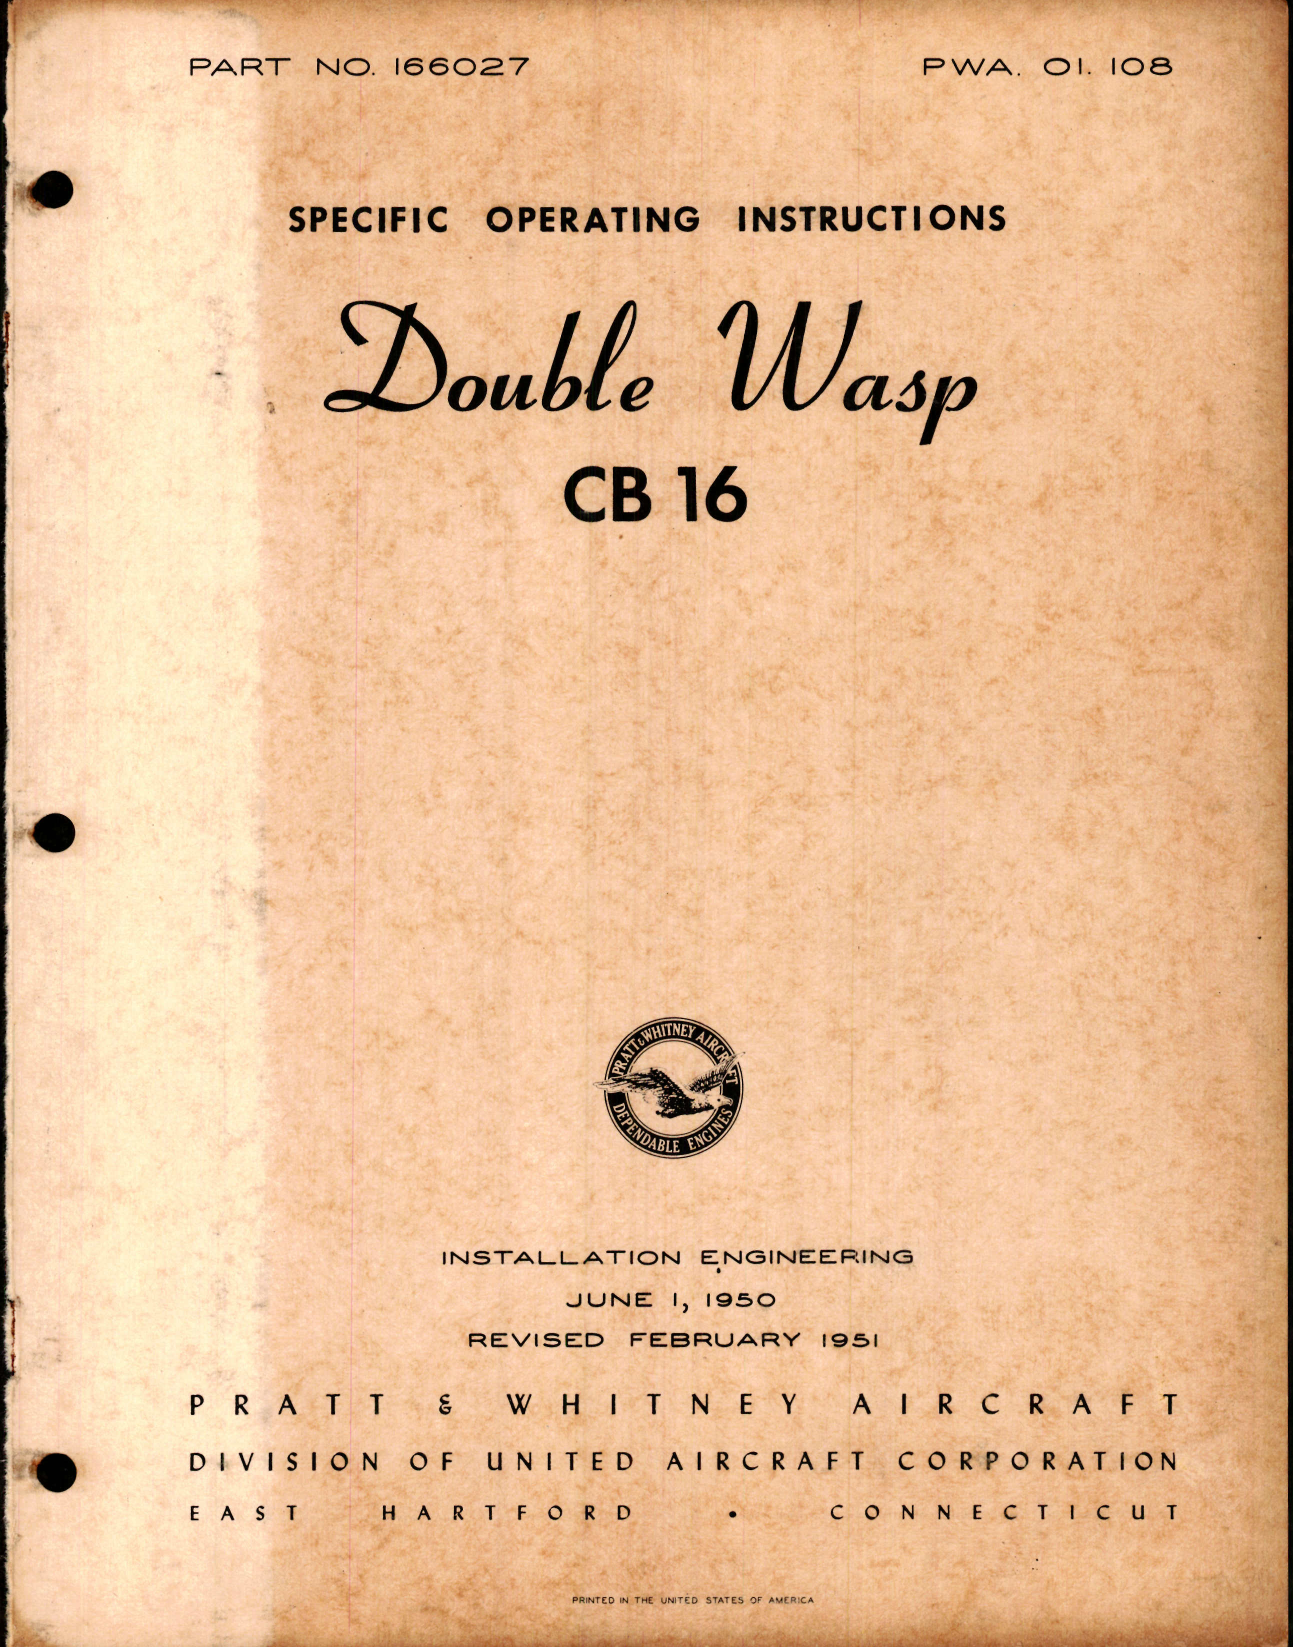 Sample page 1 from AirCorps Library document: Specific Operating Instructions for Double Wasp CB16